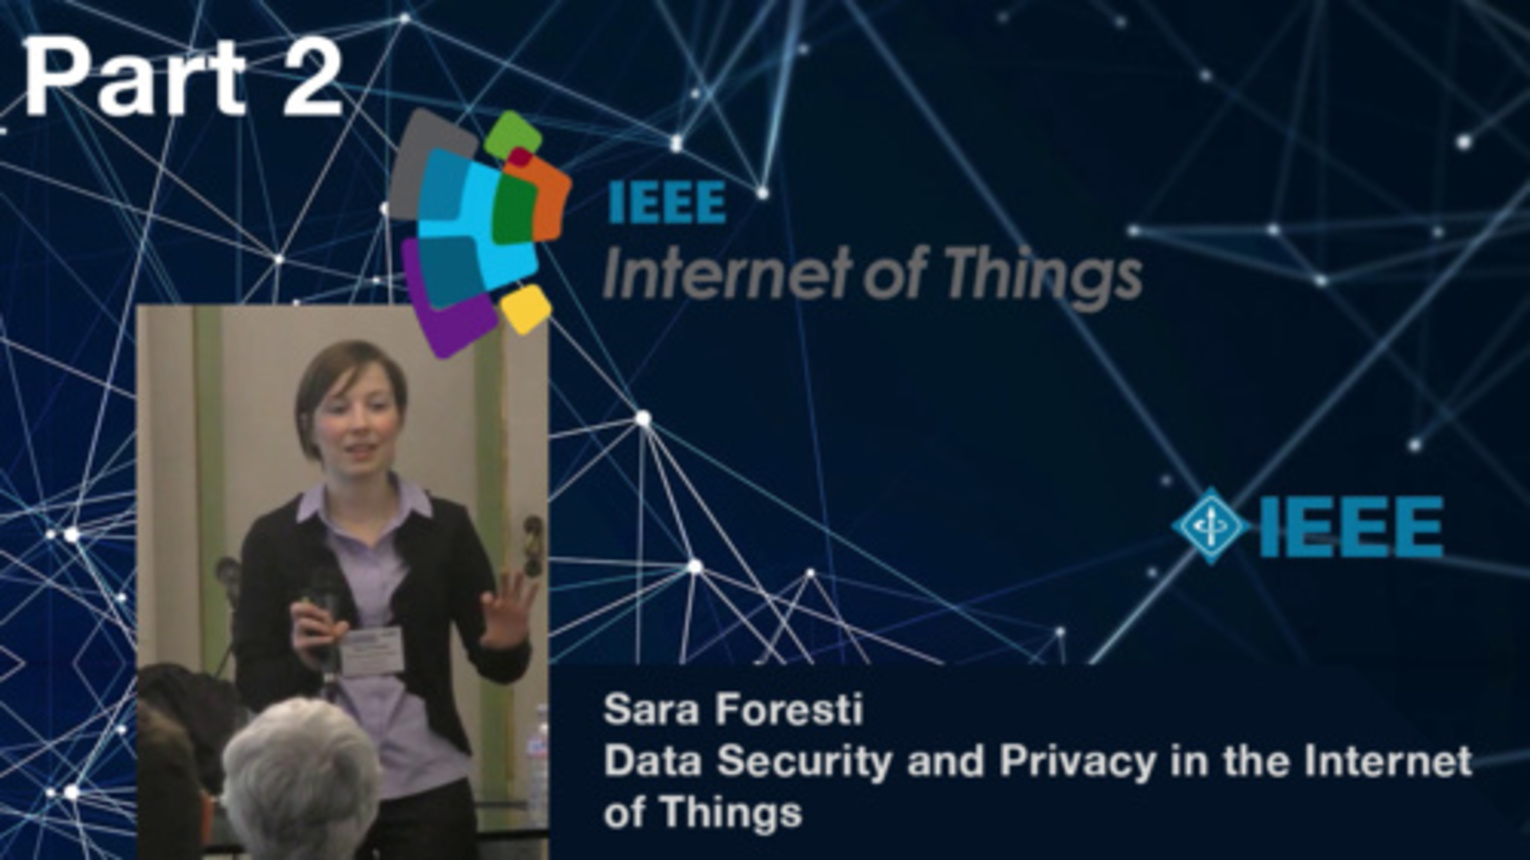 Part 2: Data Security and Privacy in the Internet of Things - Sara Foresti, IEEE WF-IoT 2015